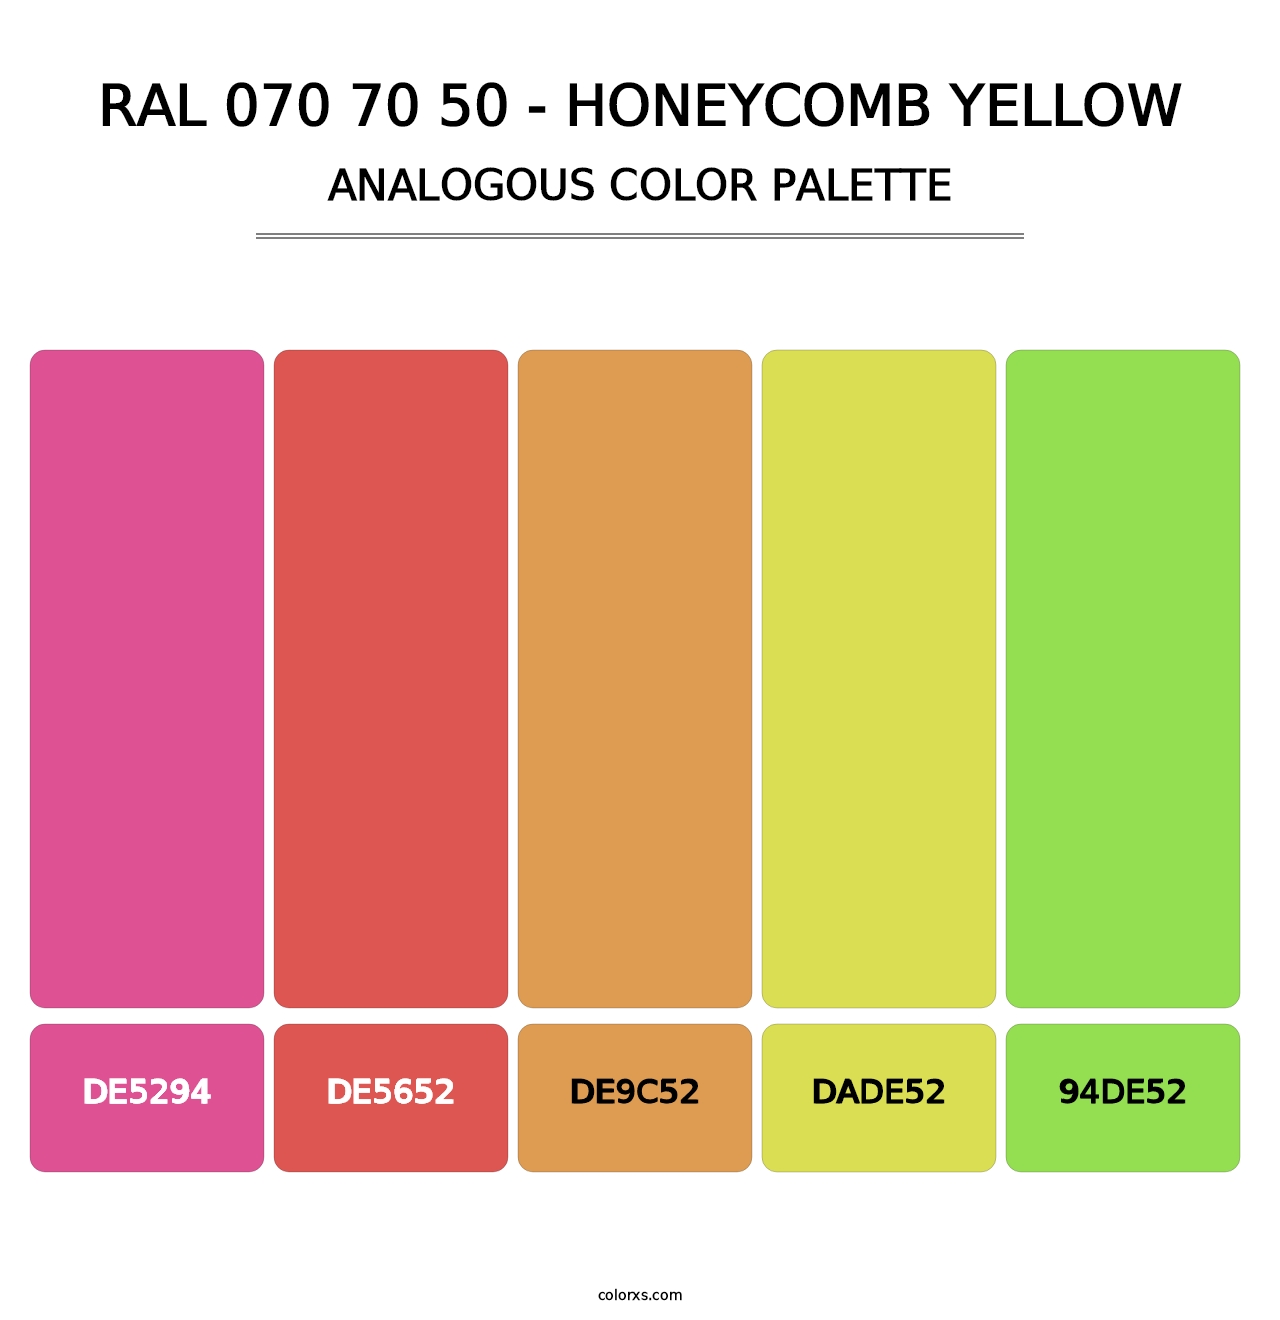 RAL 070 70 50 - Honeycomb Yellow - Analogous Color Palette